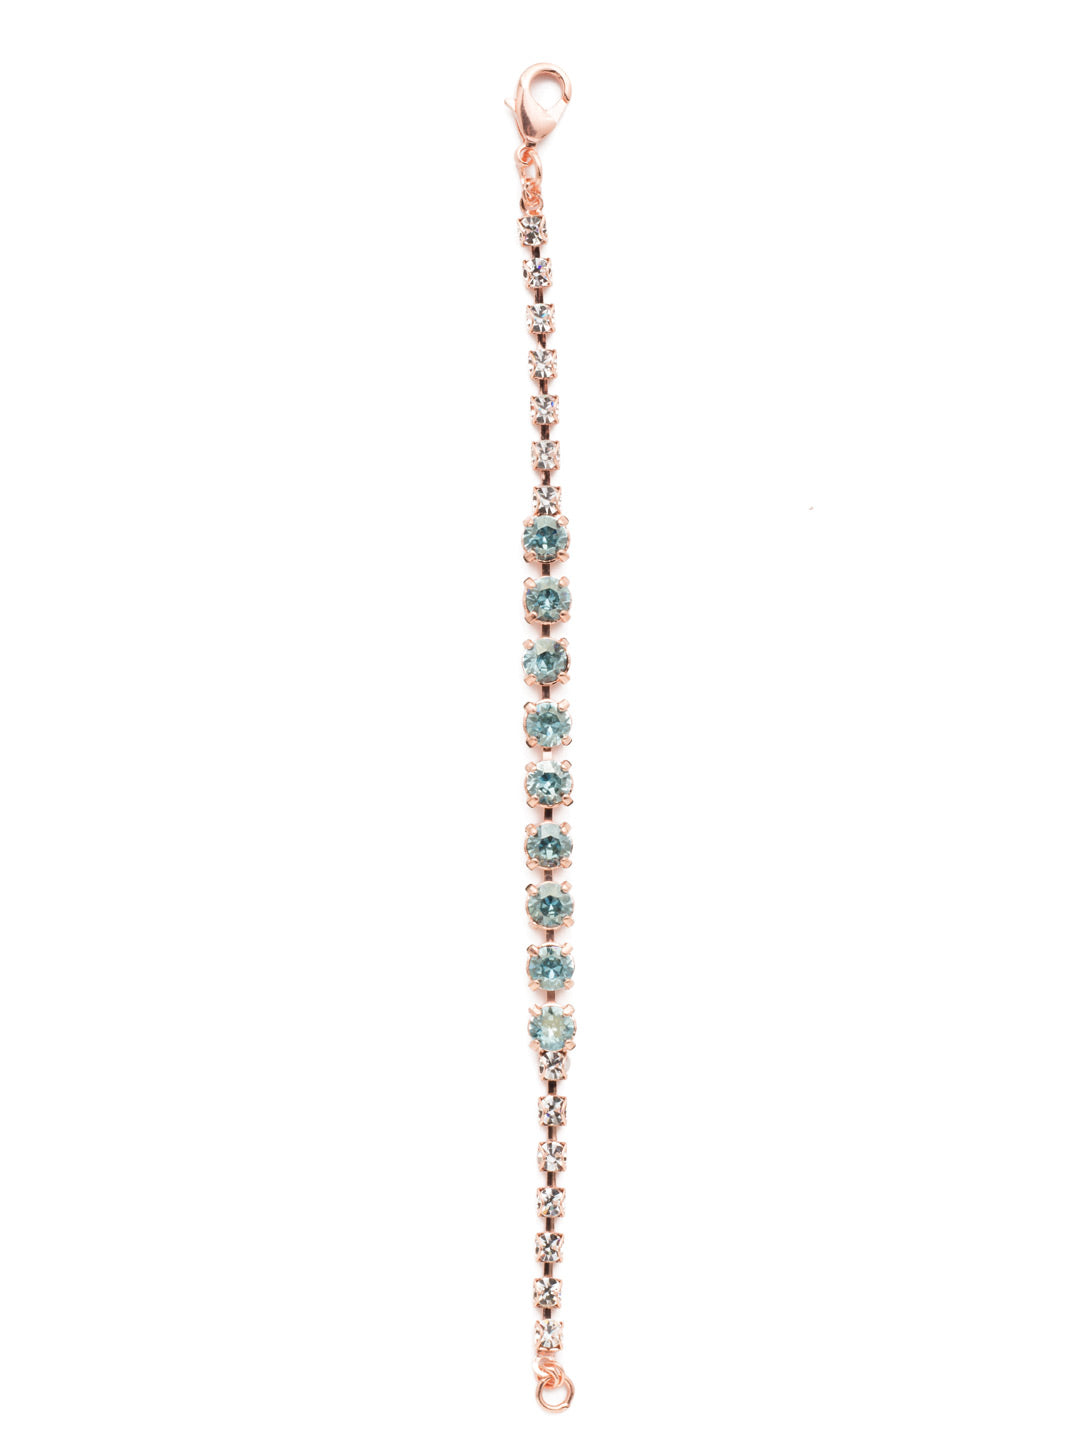 Shaughna Tennis Bracelet - BET38RGCAZ - The Shaughna Tennis Bracelet is a versatile piece that is sure to suit sparkle lovers. Its round crystal stones shine in an assortment of shades. It's just the piece to take your outfit up a notch. From Sorrelli's Crystal Azure collection in our Rose Gold-tone finish.